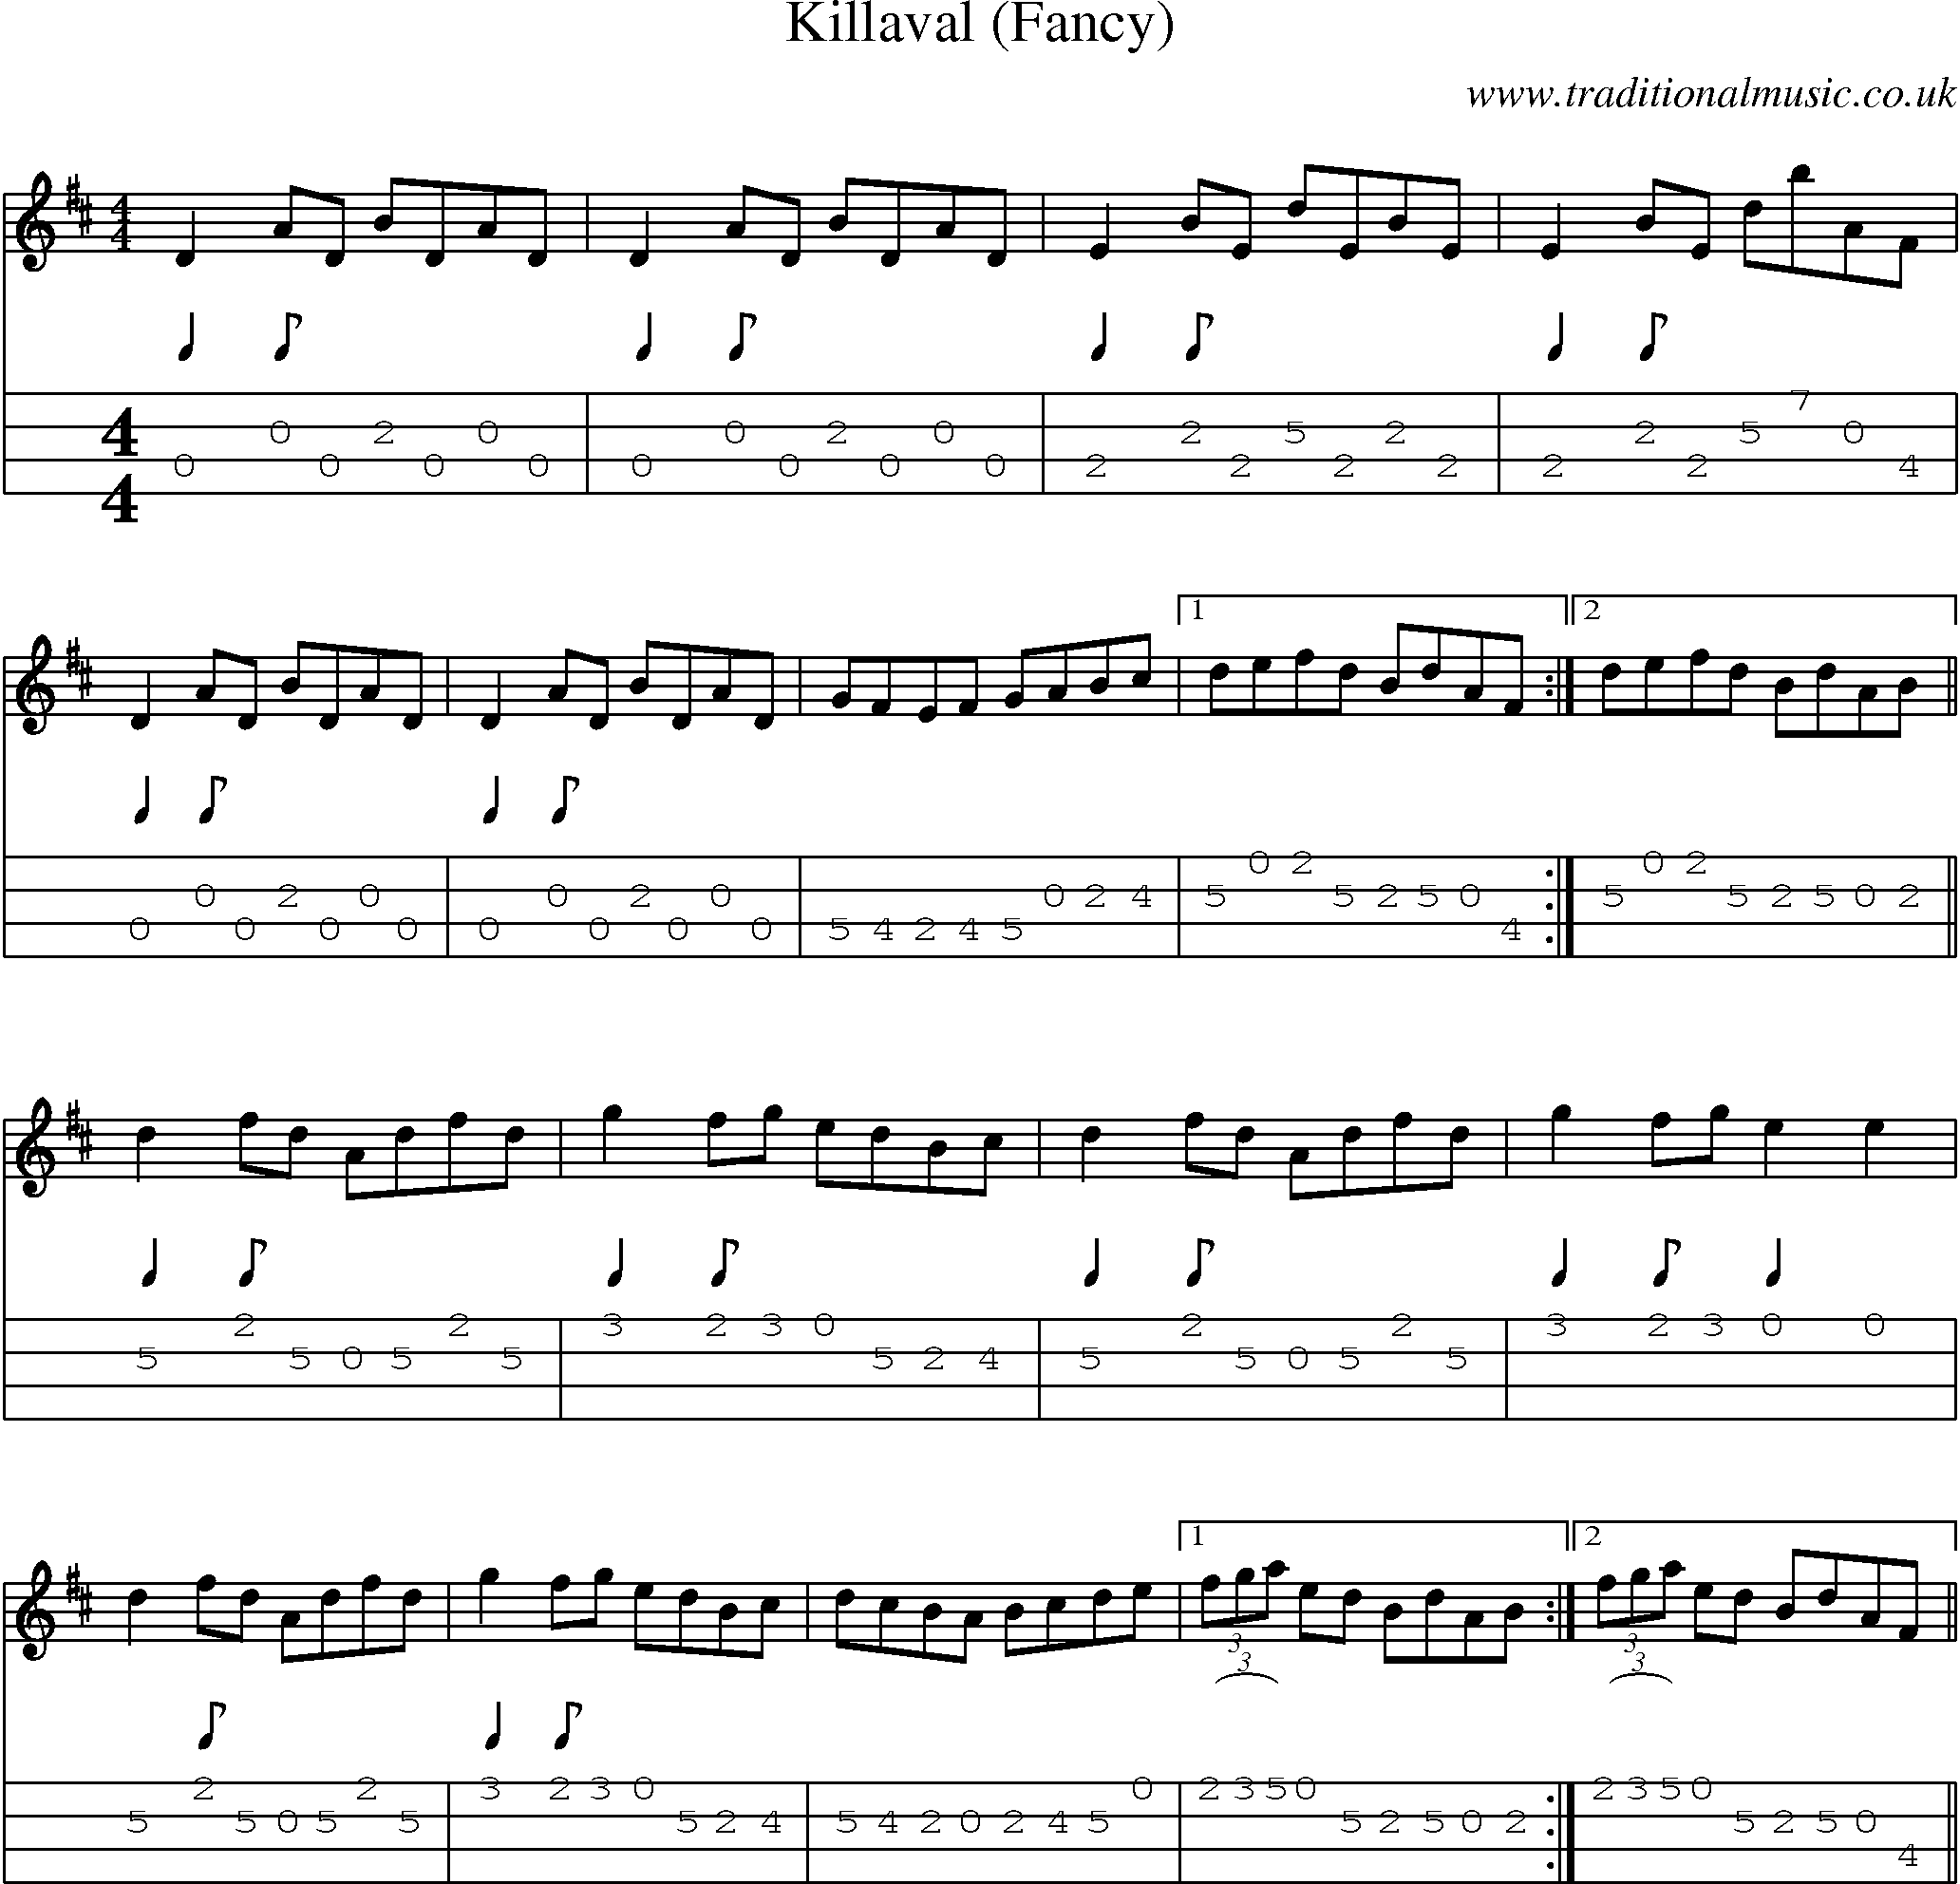 Music Score and Mandolin Tabs for Killaval (fancy)